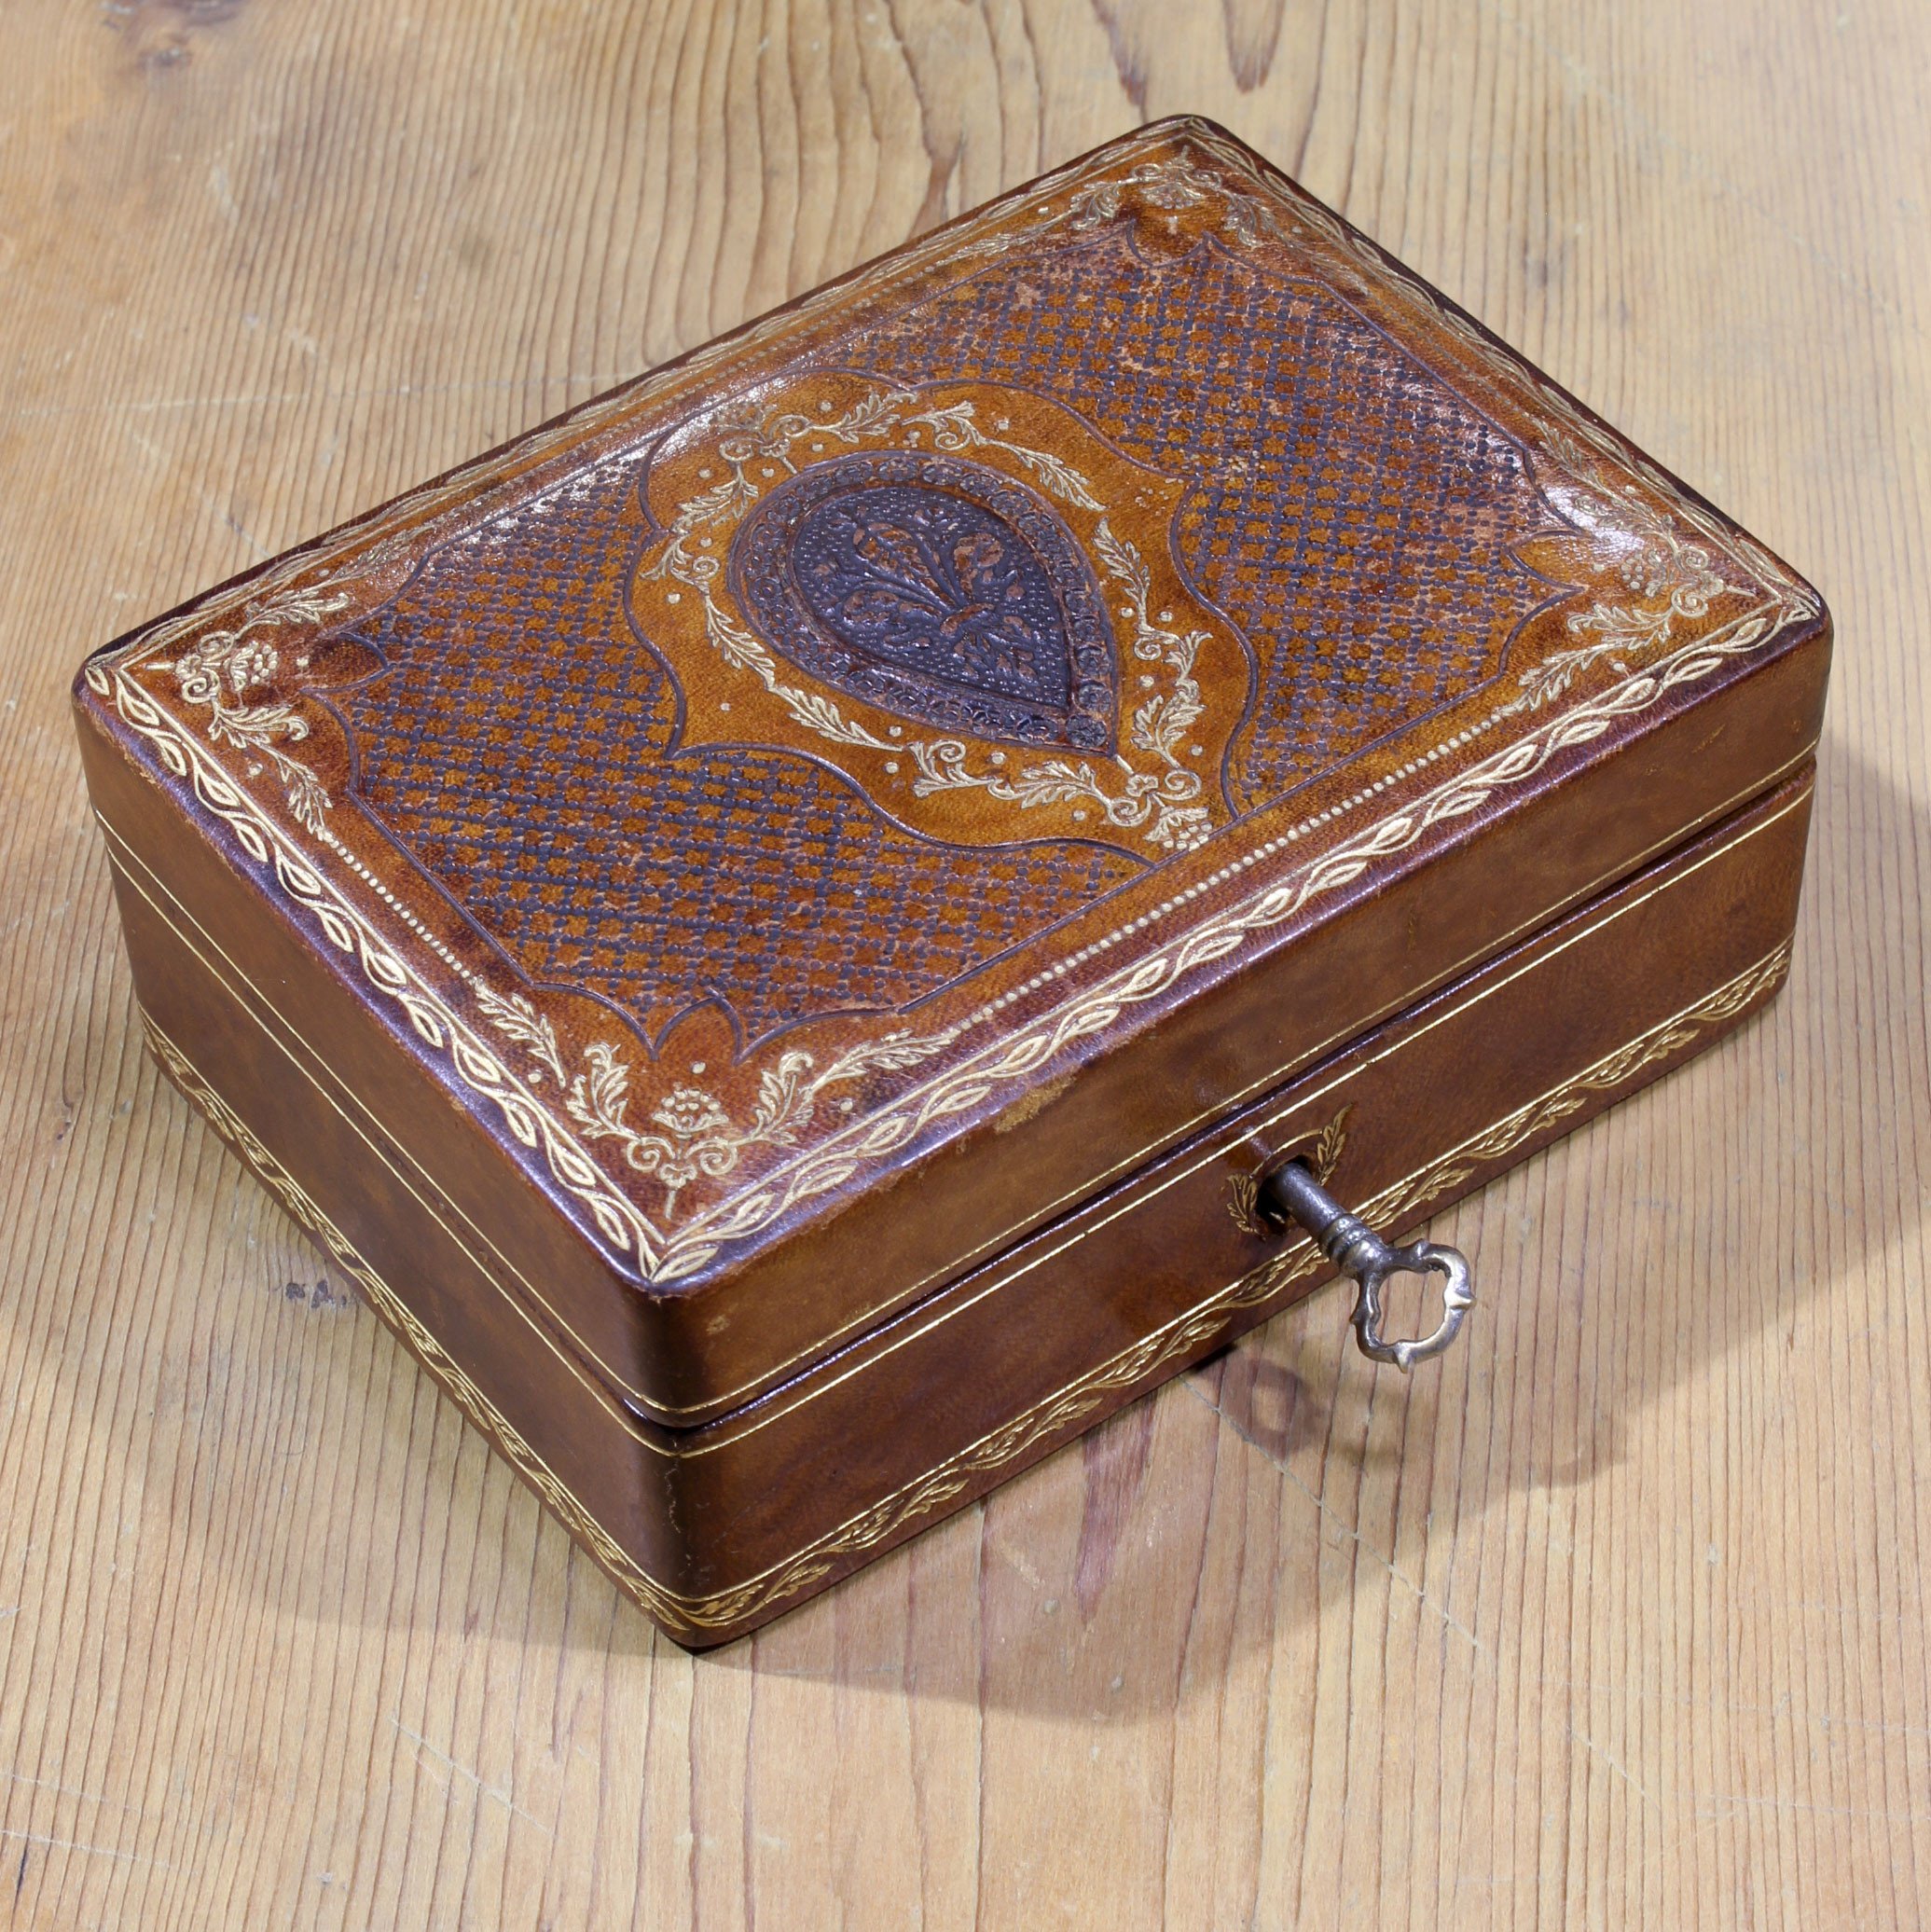 Vintage Italian Tooled Leather Jewelry Box - Fatto a Mano Antiques